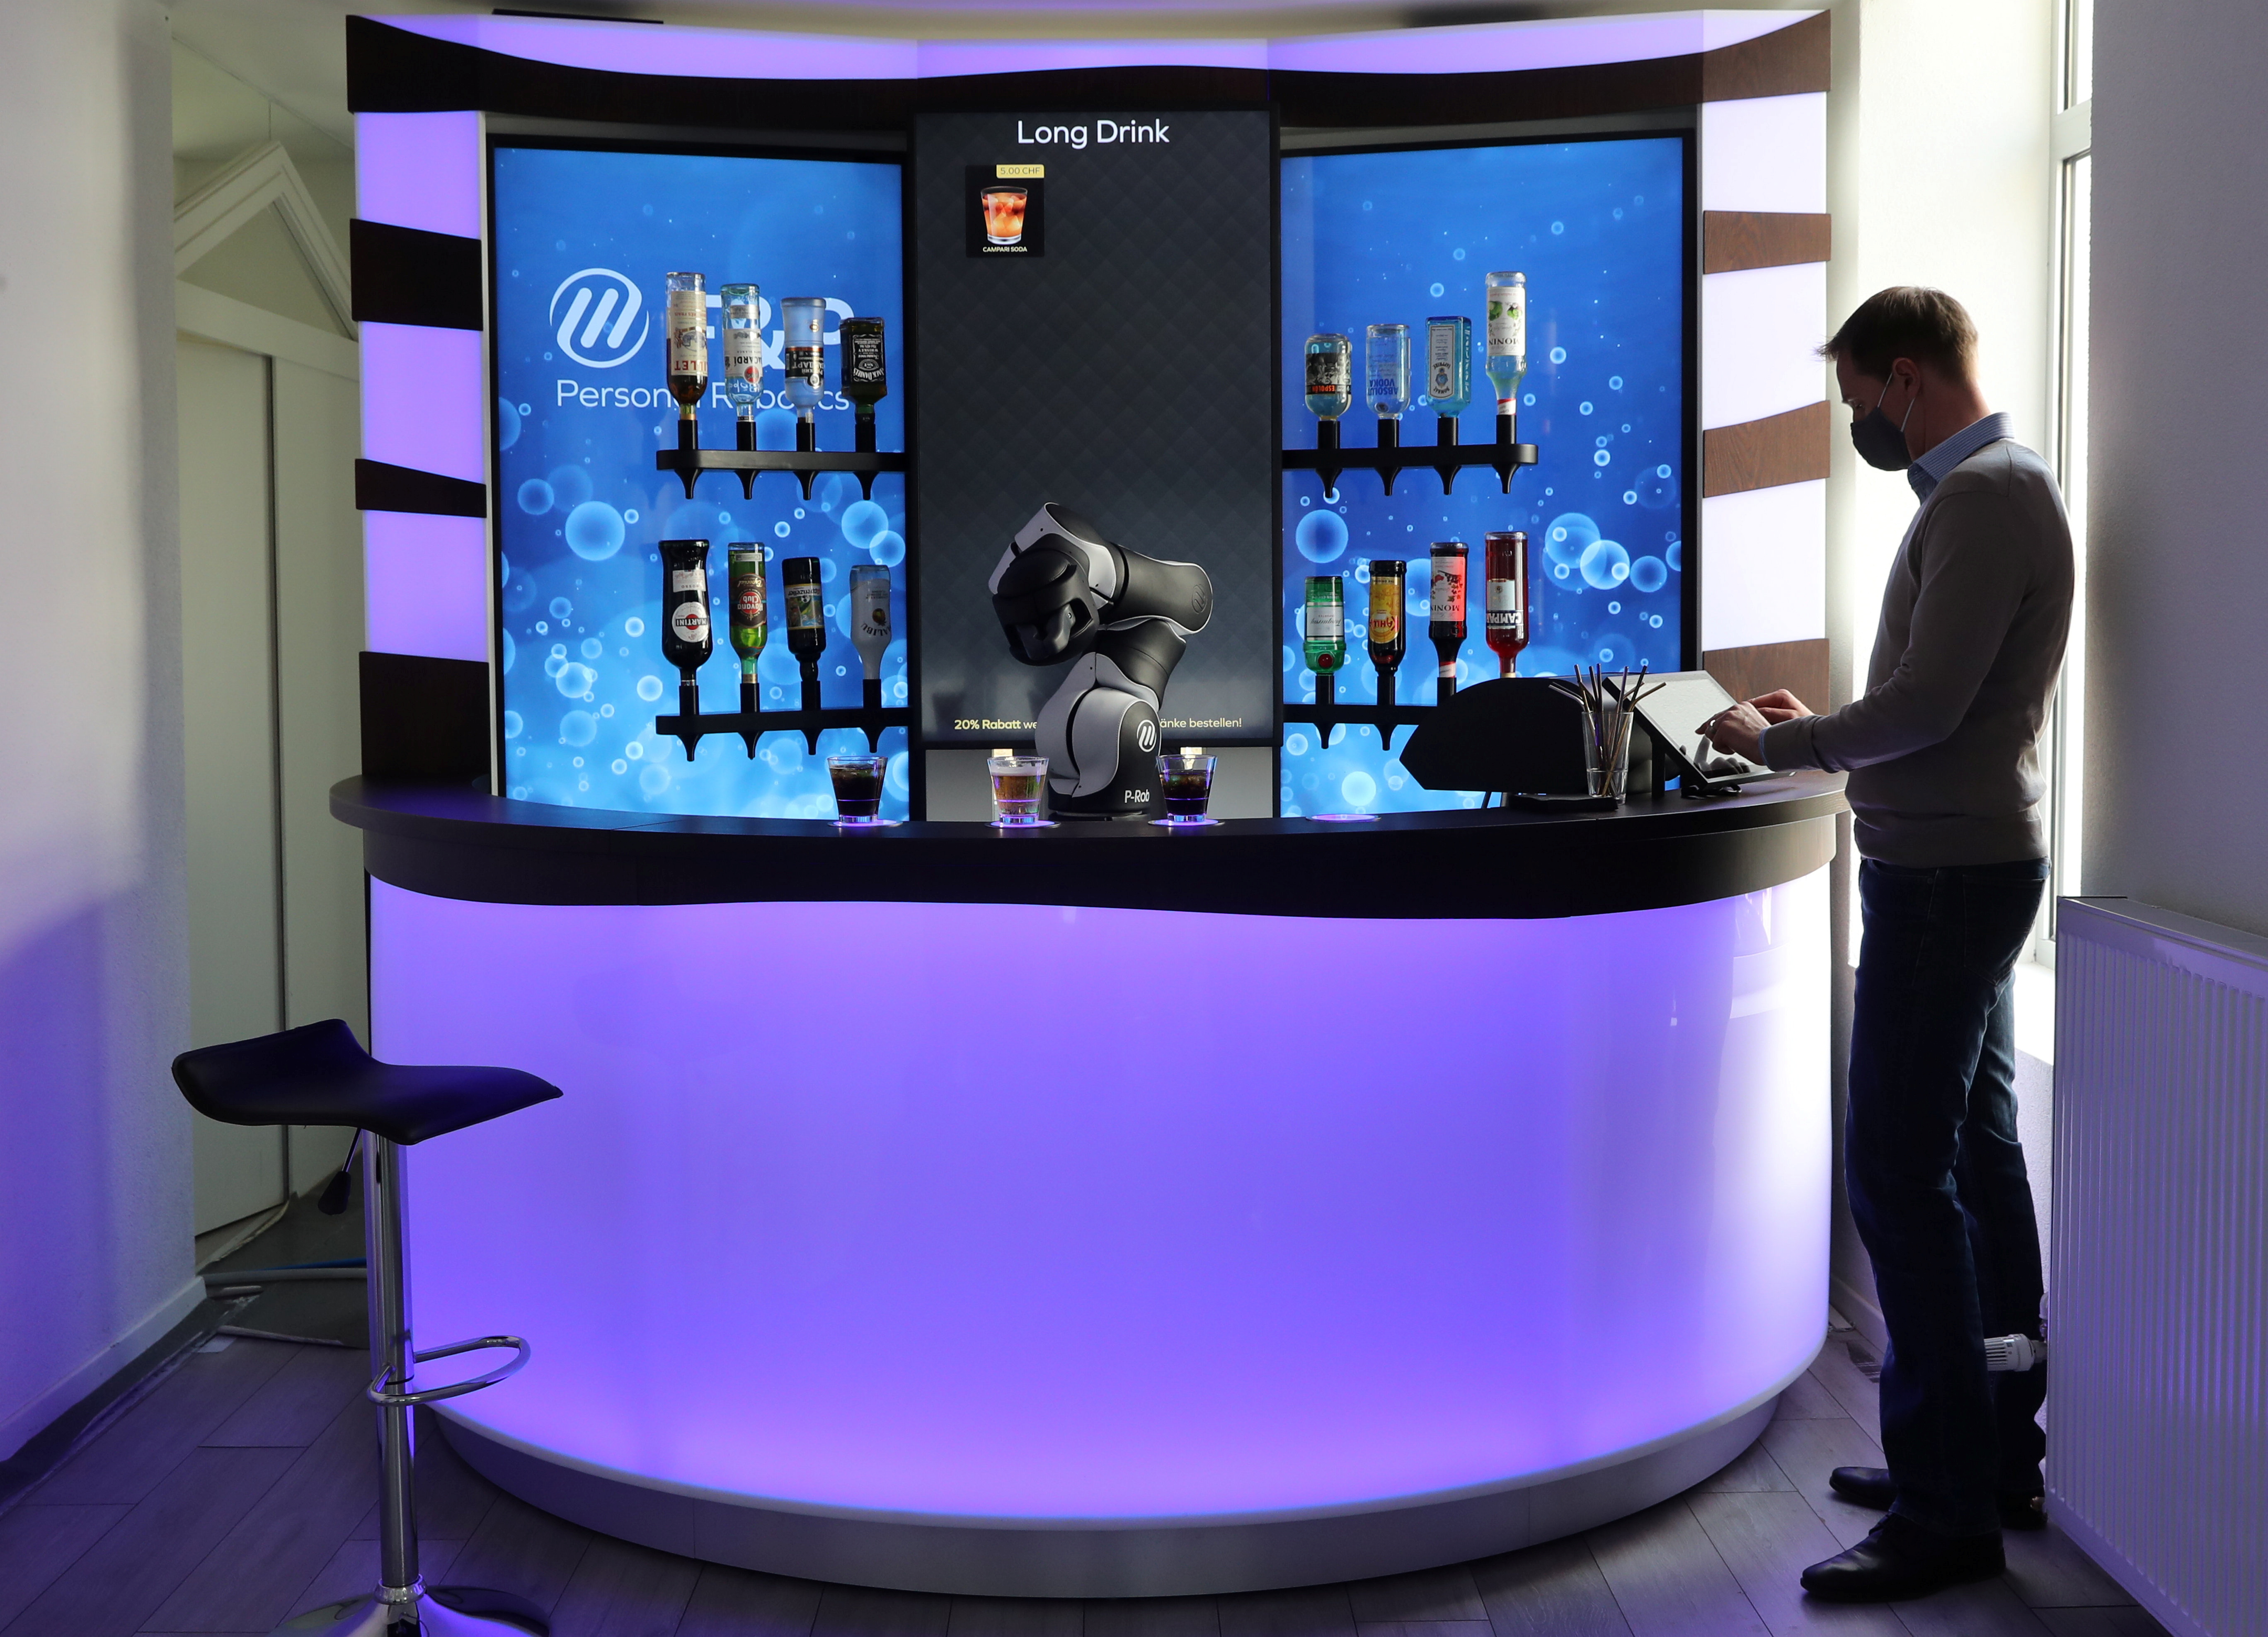 Cheers! Robot Bartender Mixes Drinks, Senses When You Need a Double Shot, Innovation